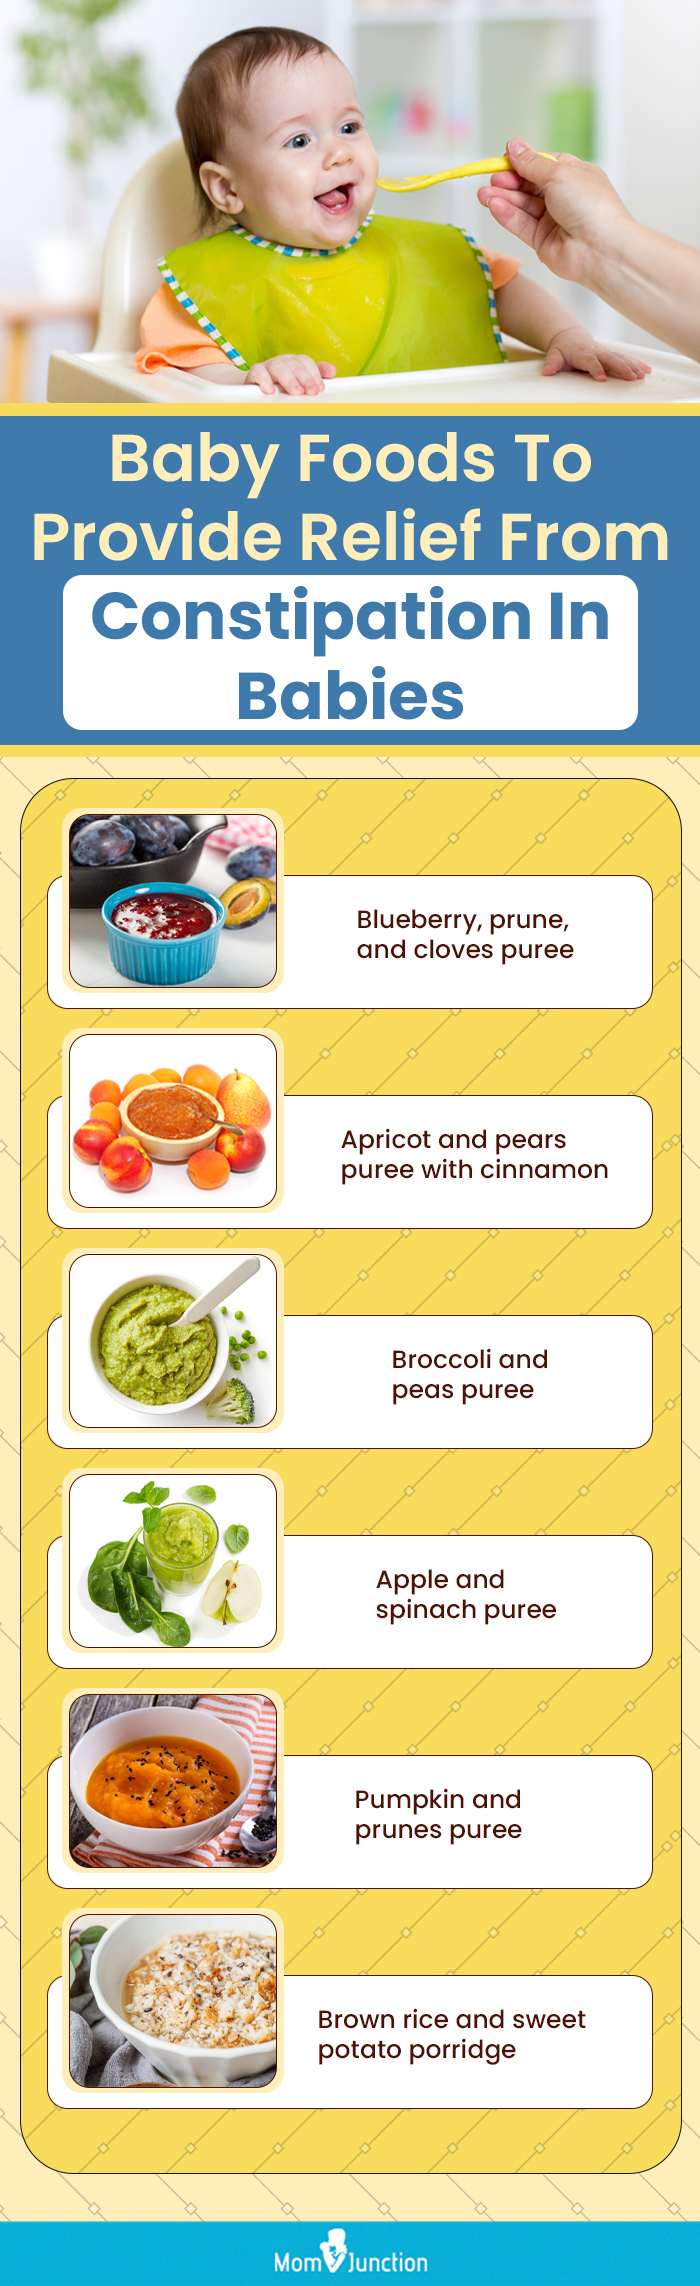 baby foods to provide relief from constipation in babies (infographic)